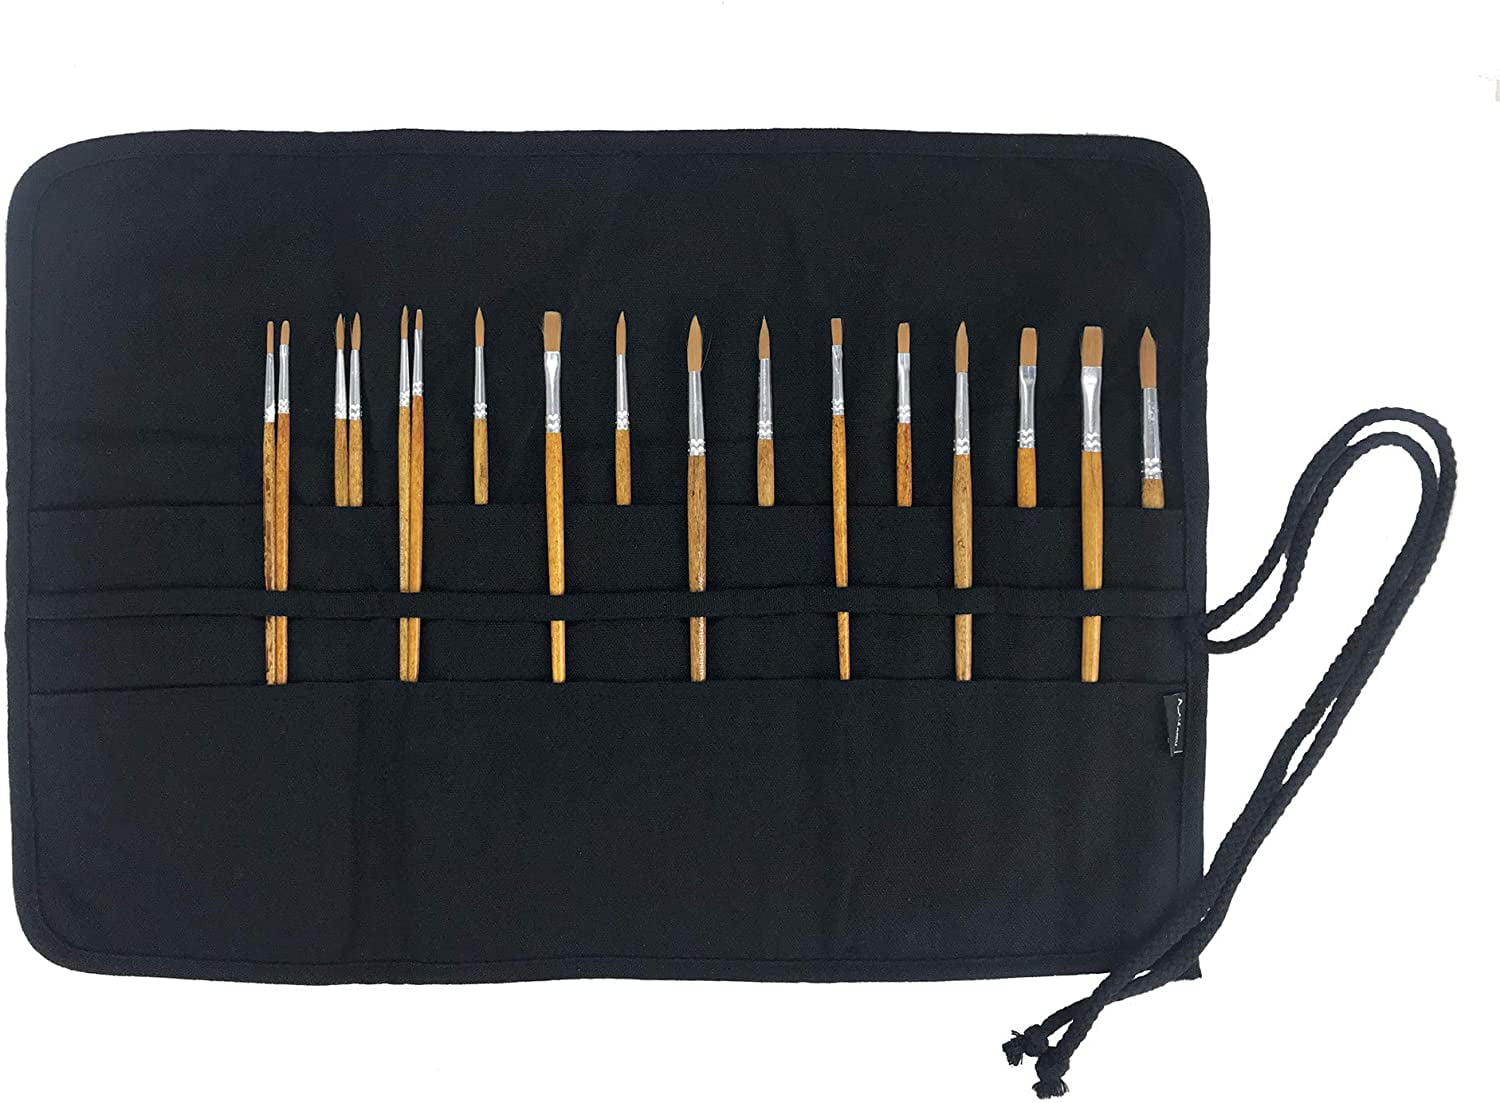 Blue spray 20 Slots Artist Paint Brush Roll Up Bag Holder Canvas Pouch Makeup Case Organizer Rollup Protection（Without Brushes） 